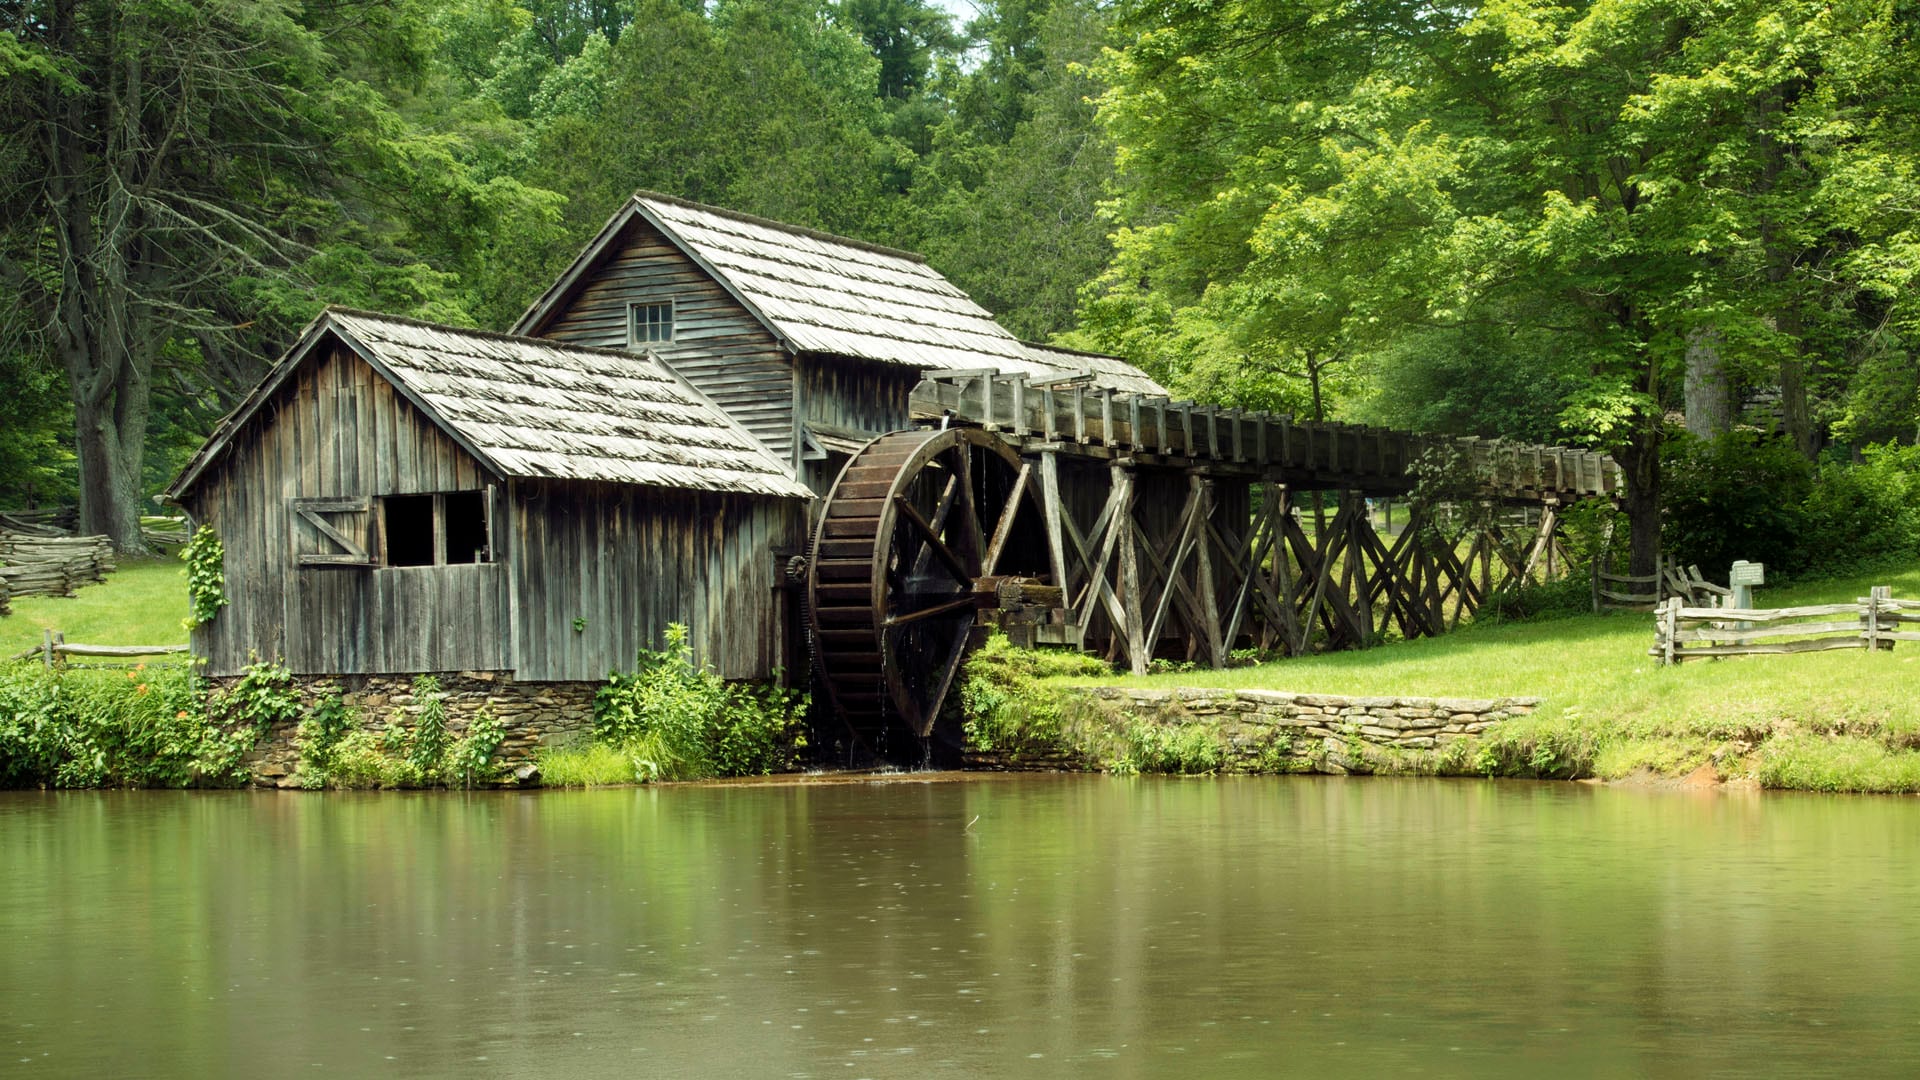 Built by Edwin Boston Mabry around 1910, Mabry Mill is a historic grist mill along the Blue Ridge Parkway. 